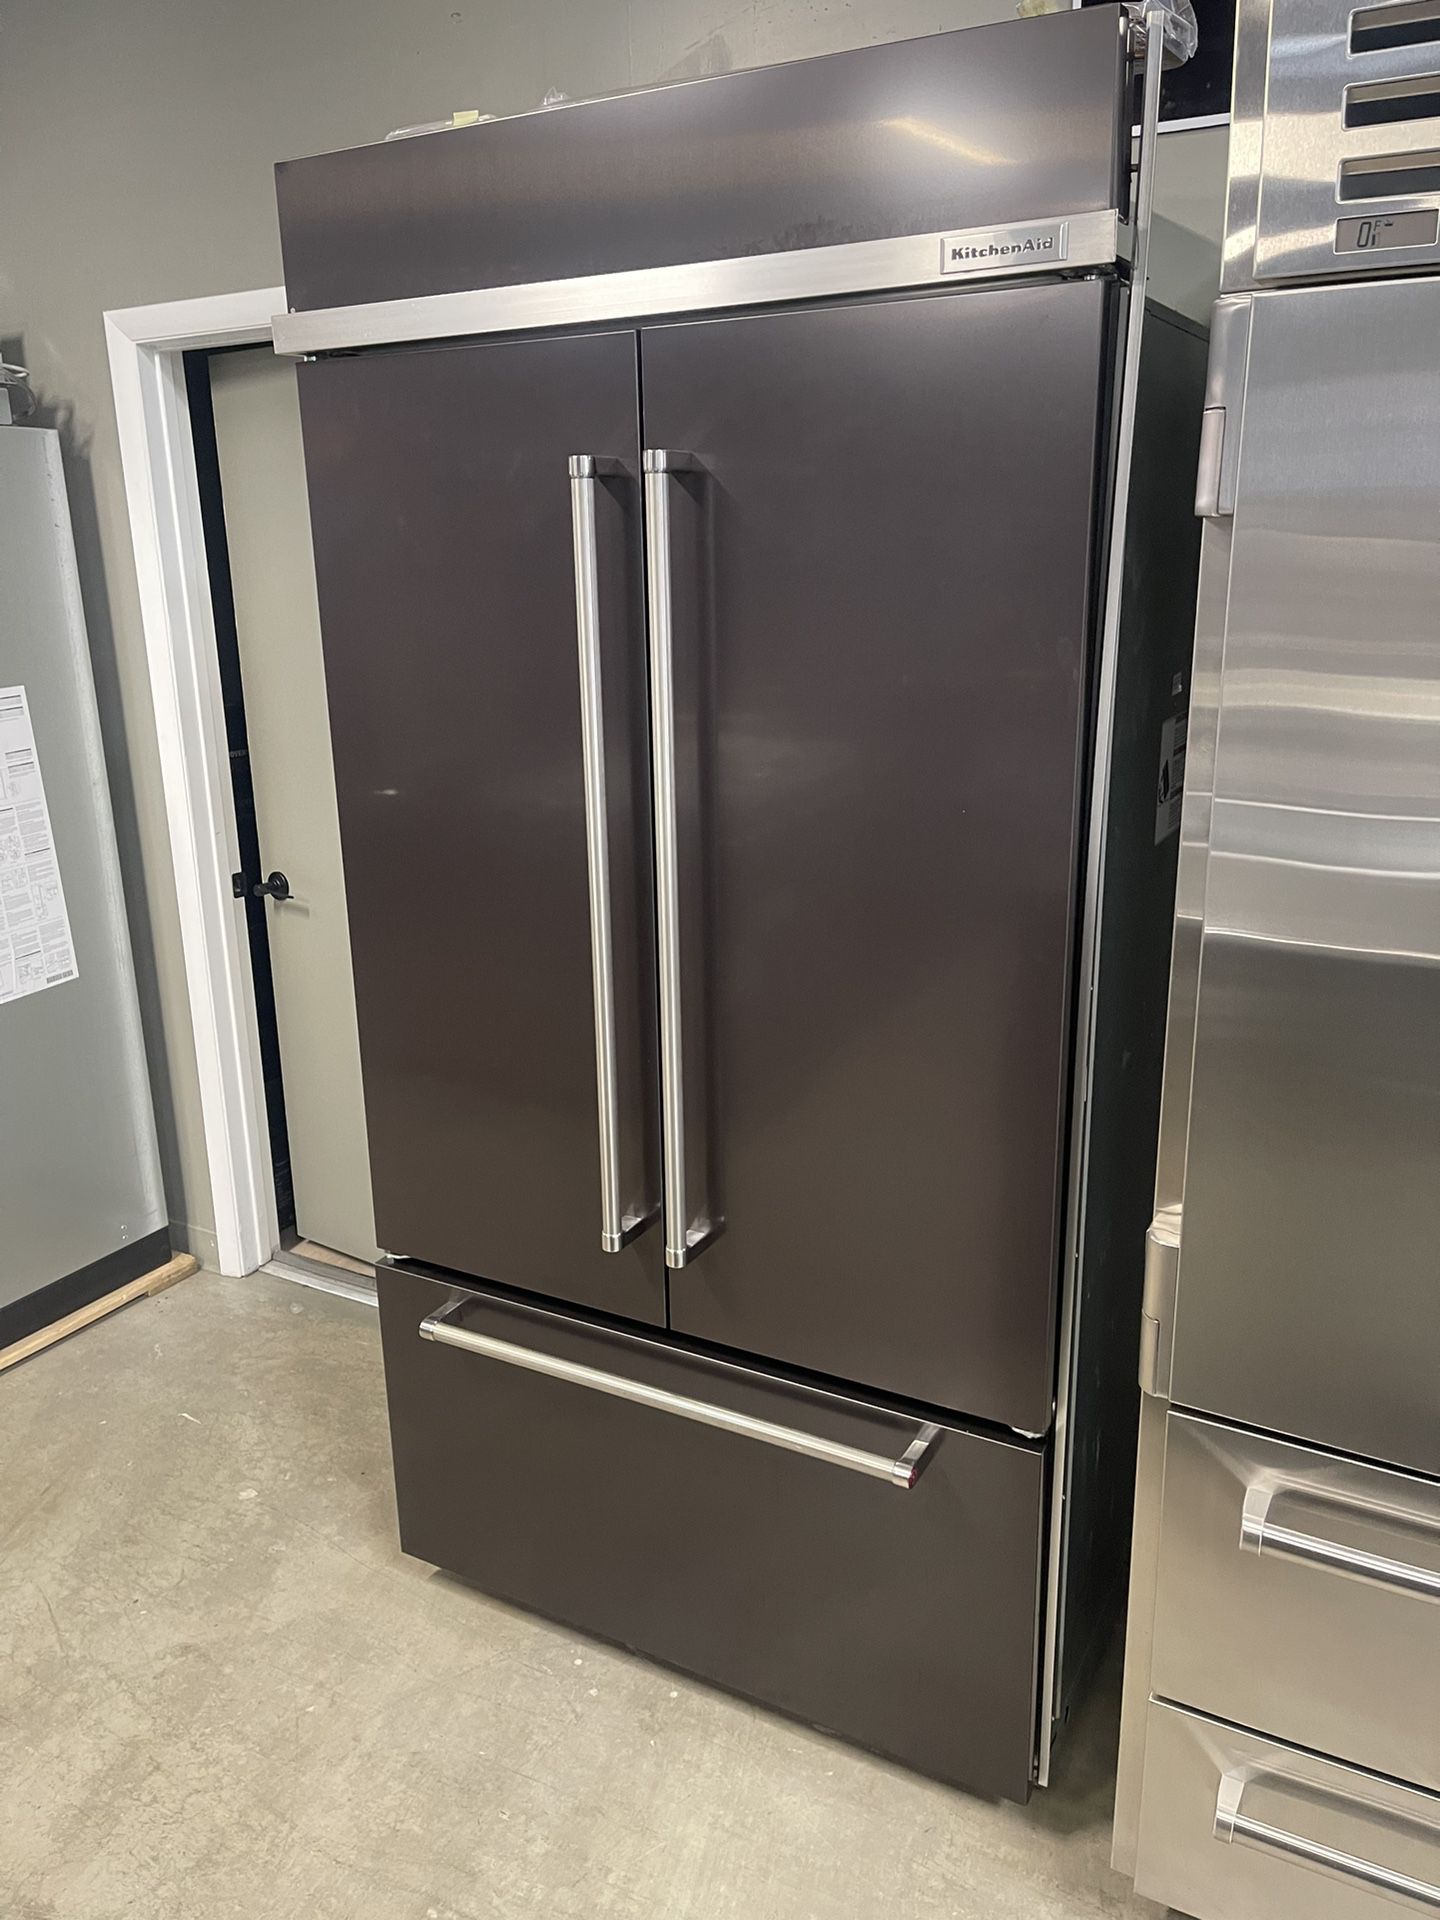 KITCHEN AID BLACK STAINLESS STEEL FRENCH DOOR REFRIGERATOR BUILT IN 42 WIDE 